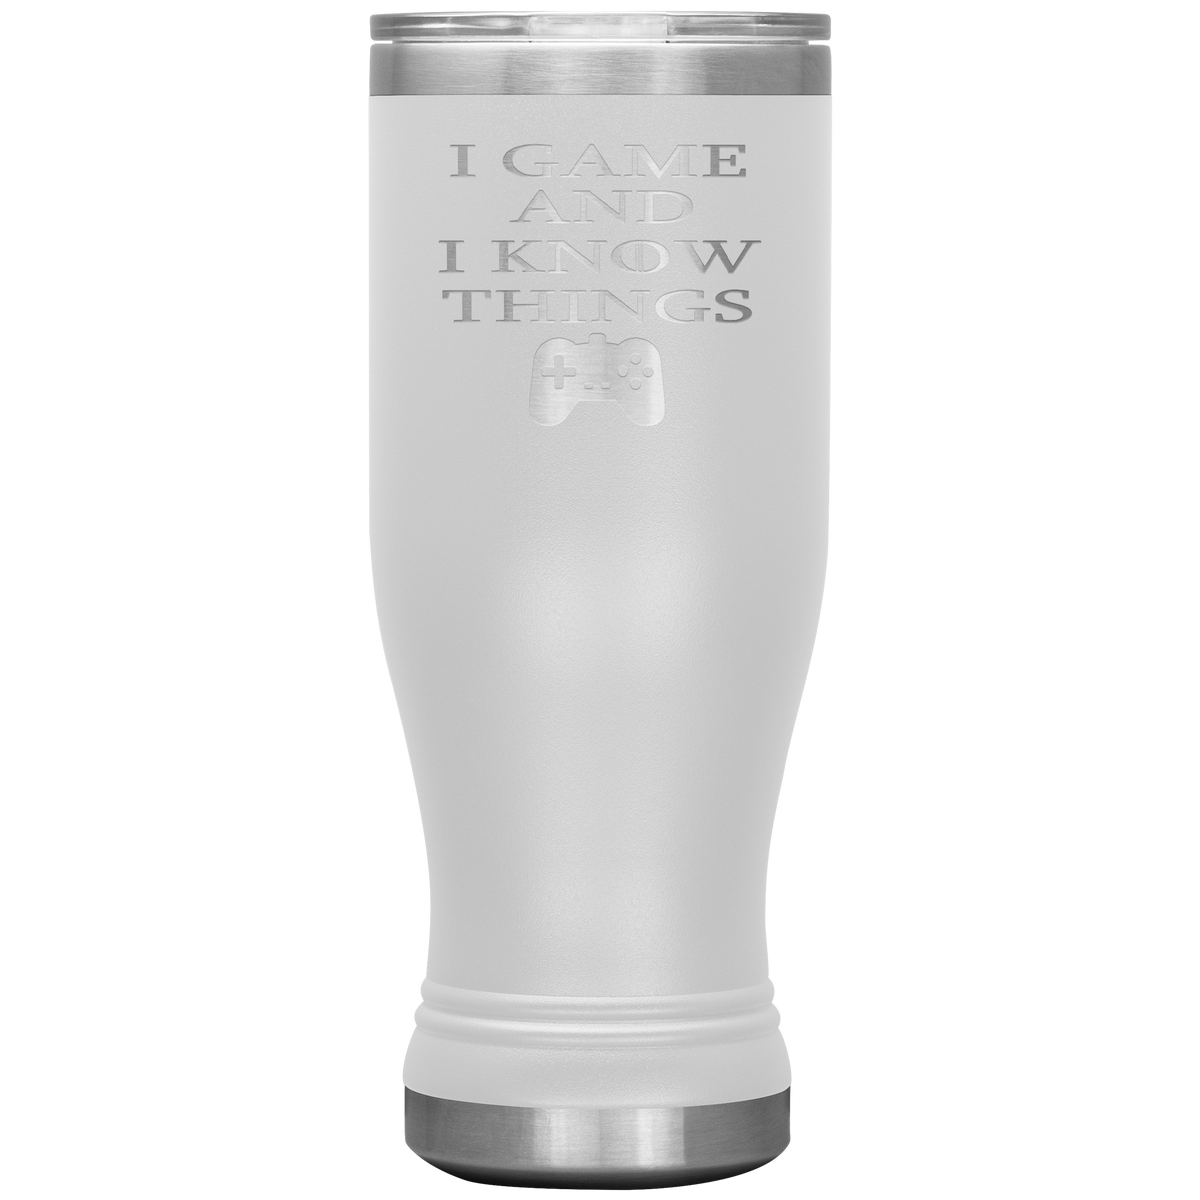 Gamer Gift I Game and I Know Things Pilsner Tumbler